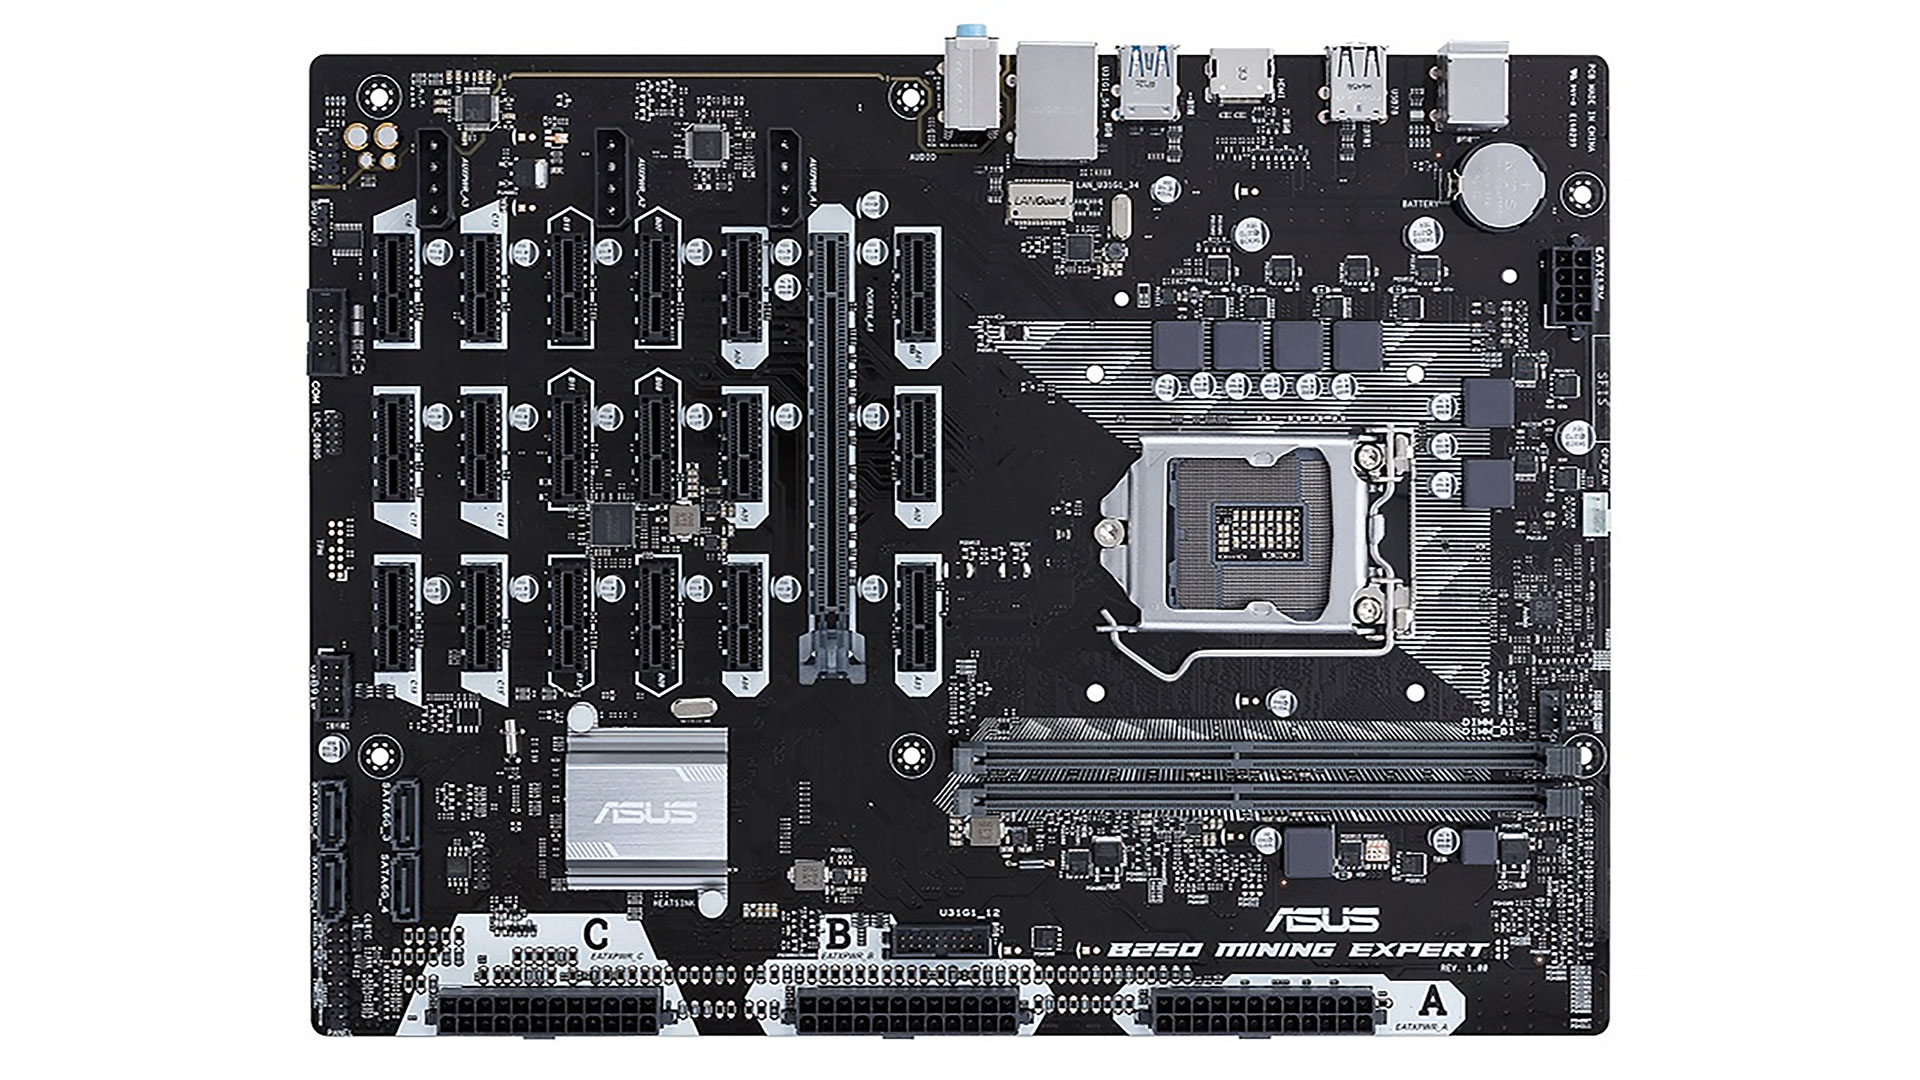 Asus has a up to 19 GPUs | PC Gamer